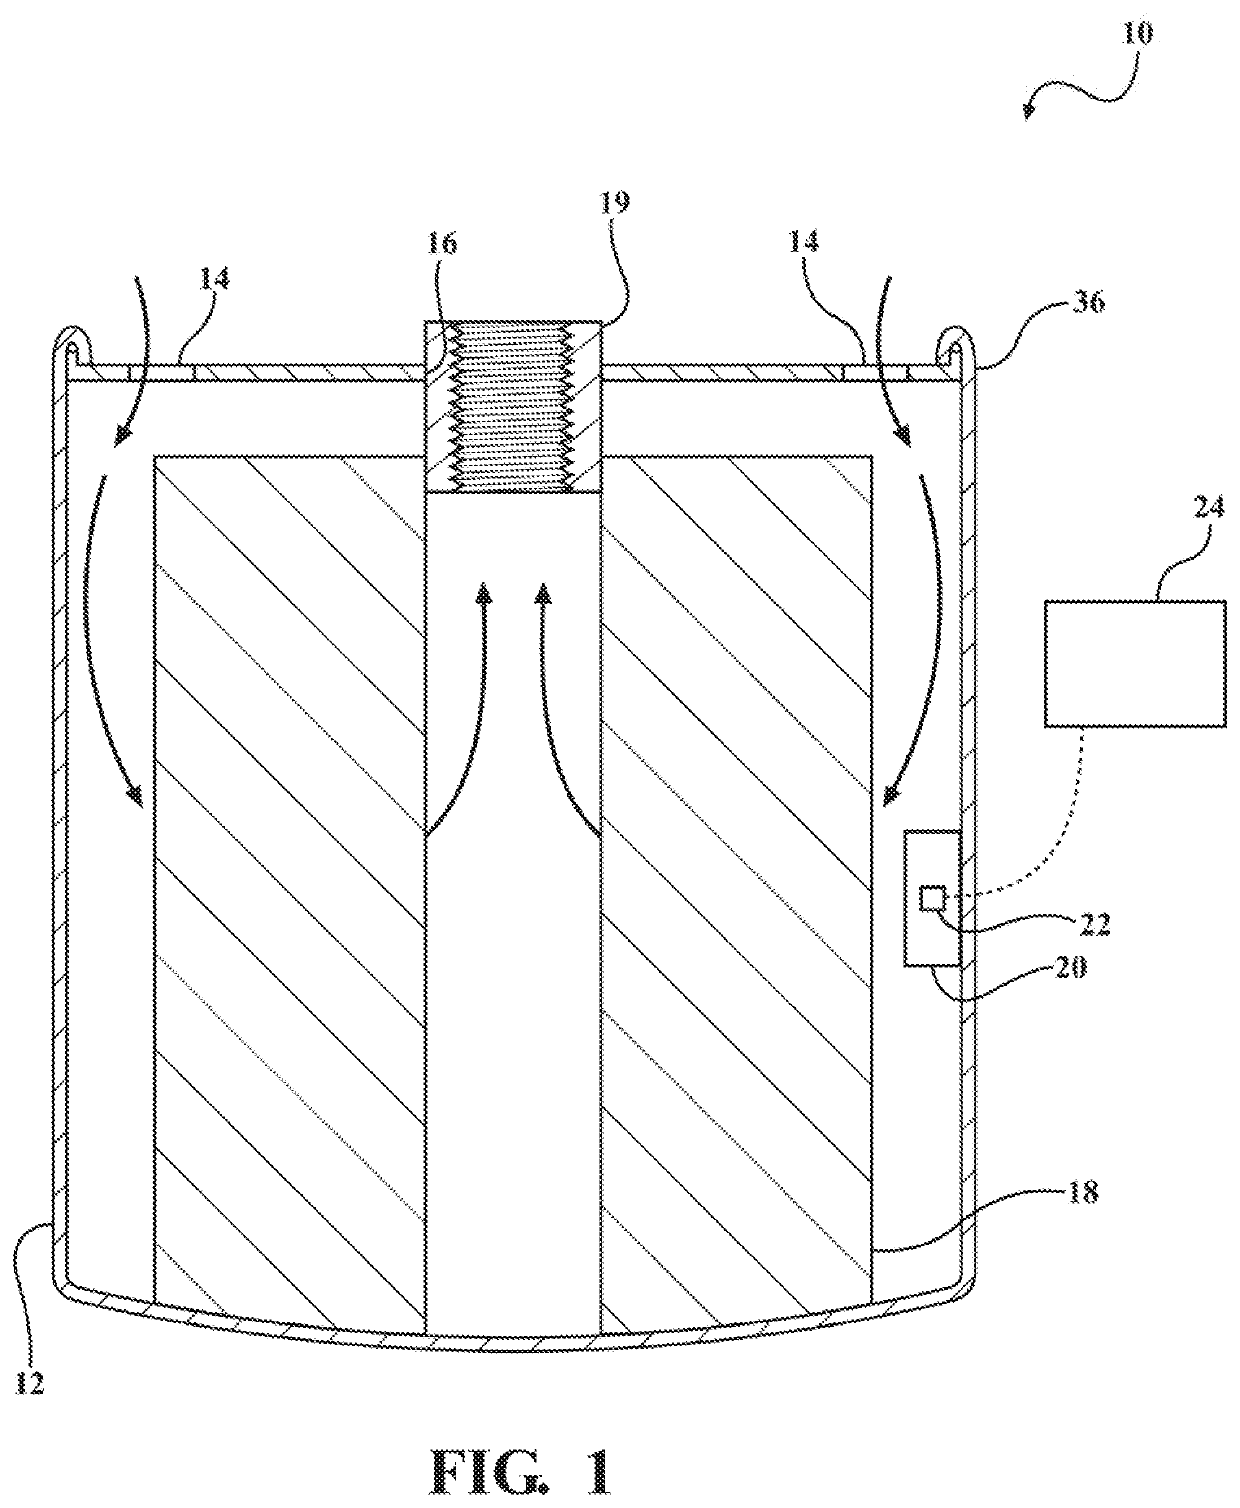 Disposable filter including an integrated sensor assembly